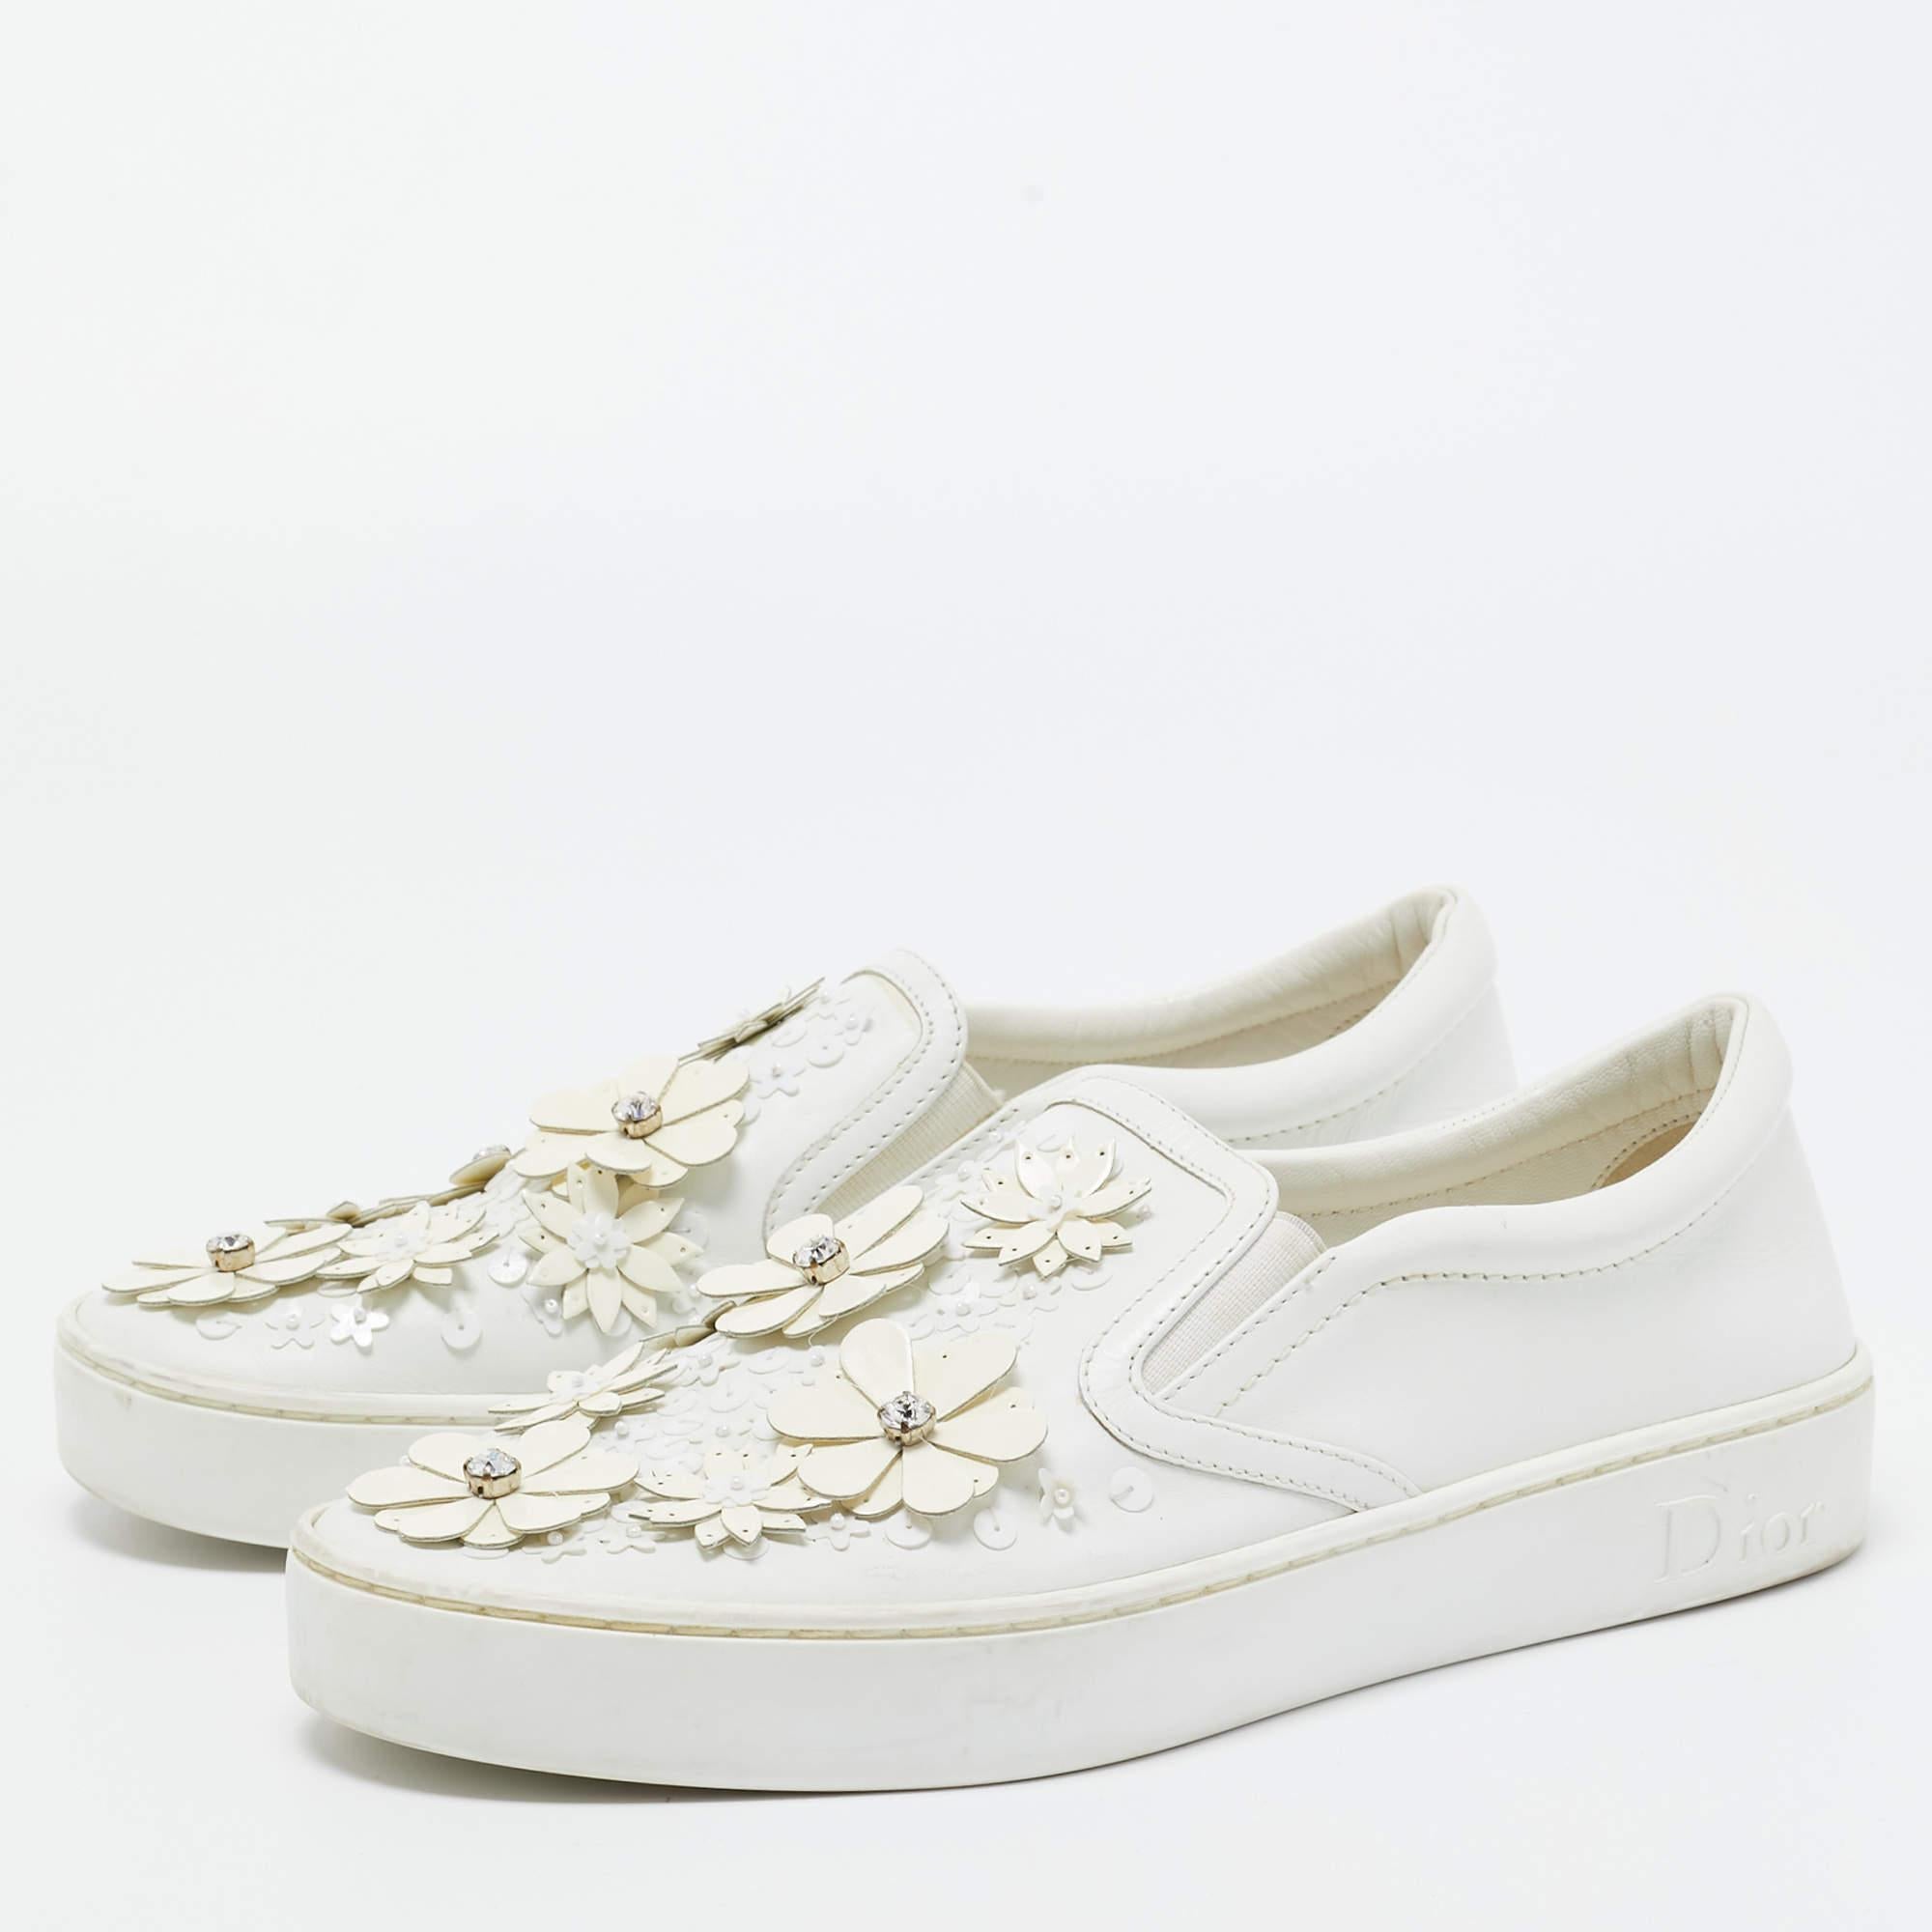 Elevate your footwear game with these Dior sneakers. Combining high-end aesthetics and unmatched comfort, these white sneakers are a symbol of modern luxury and impeccable taste.

